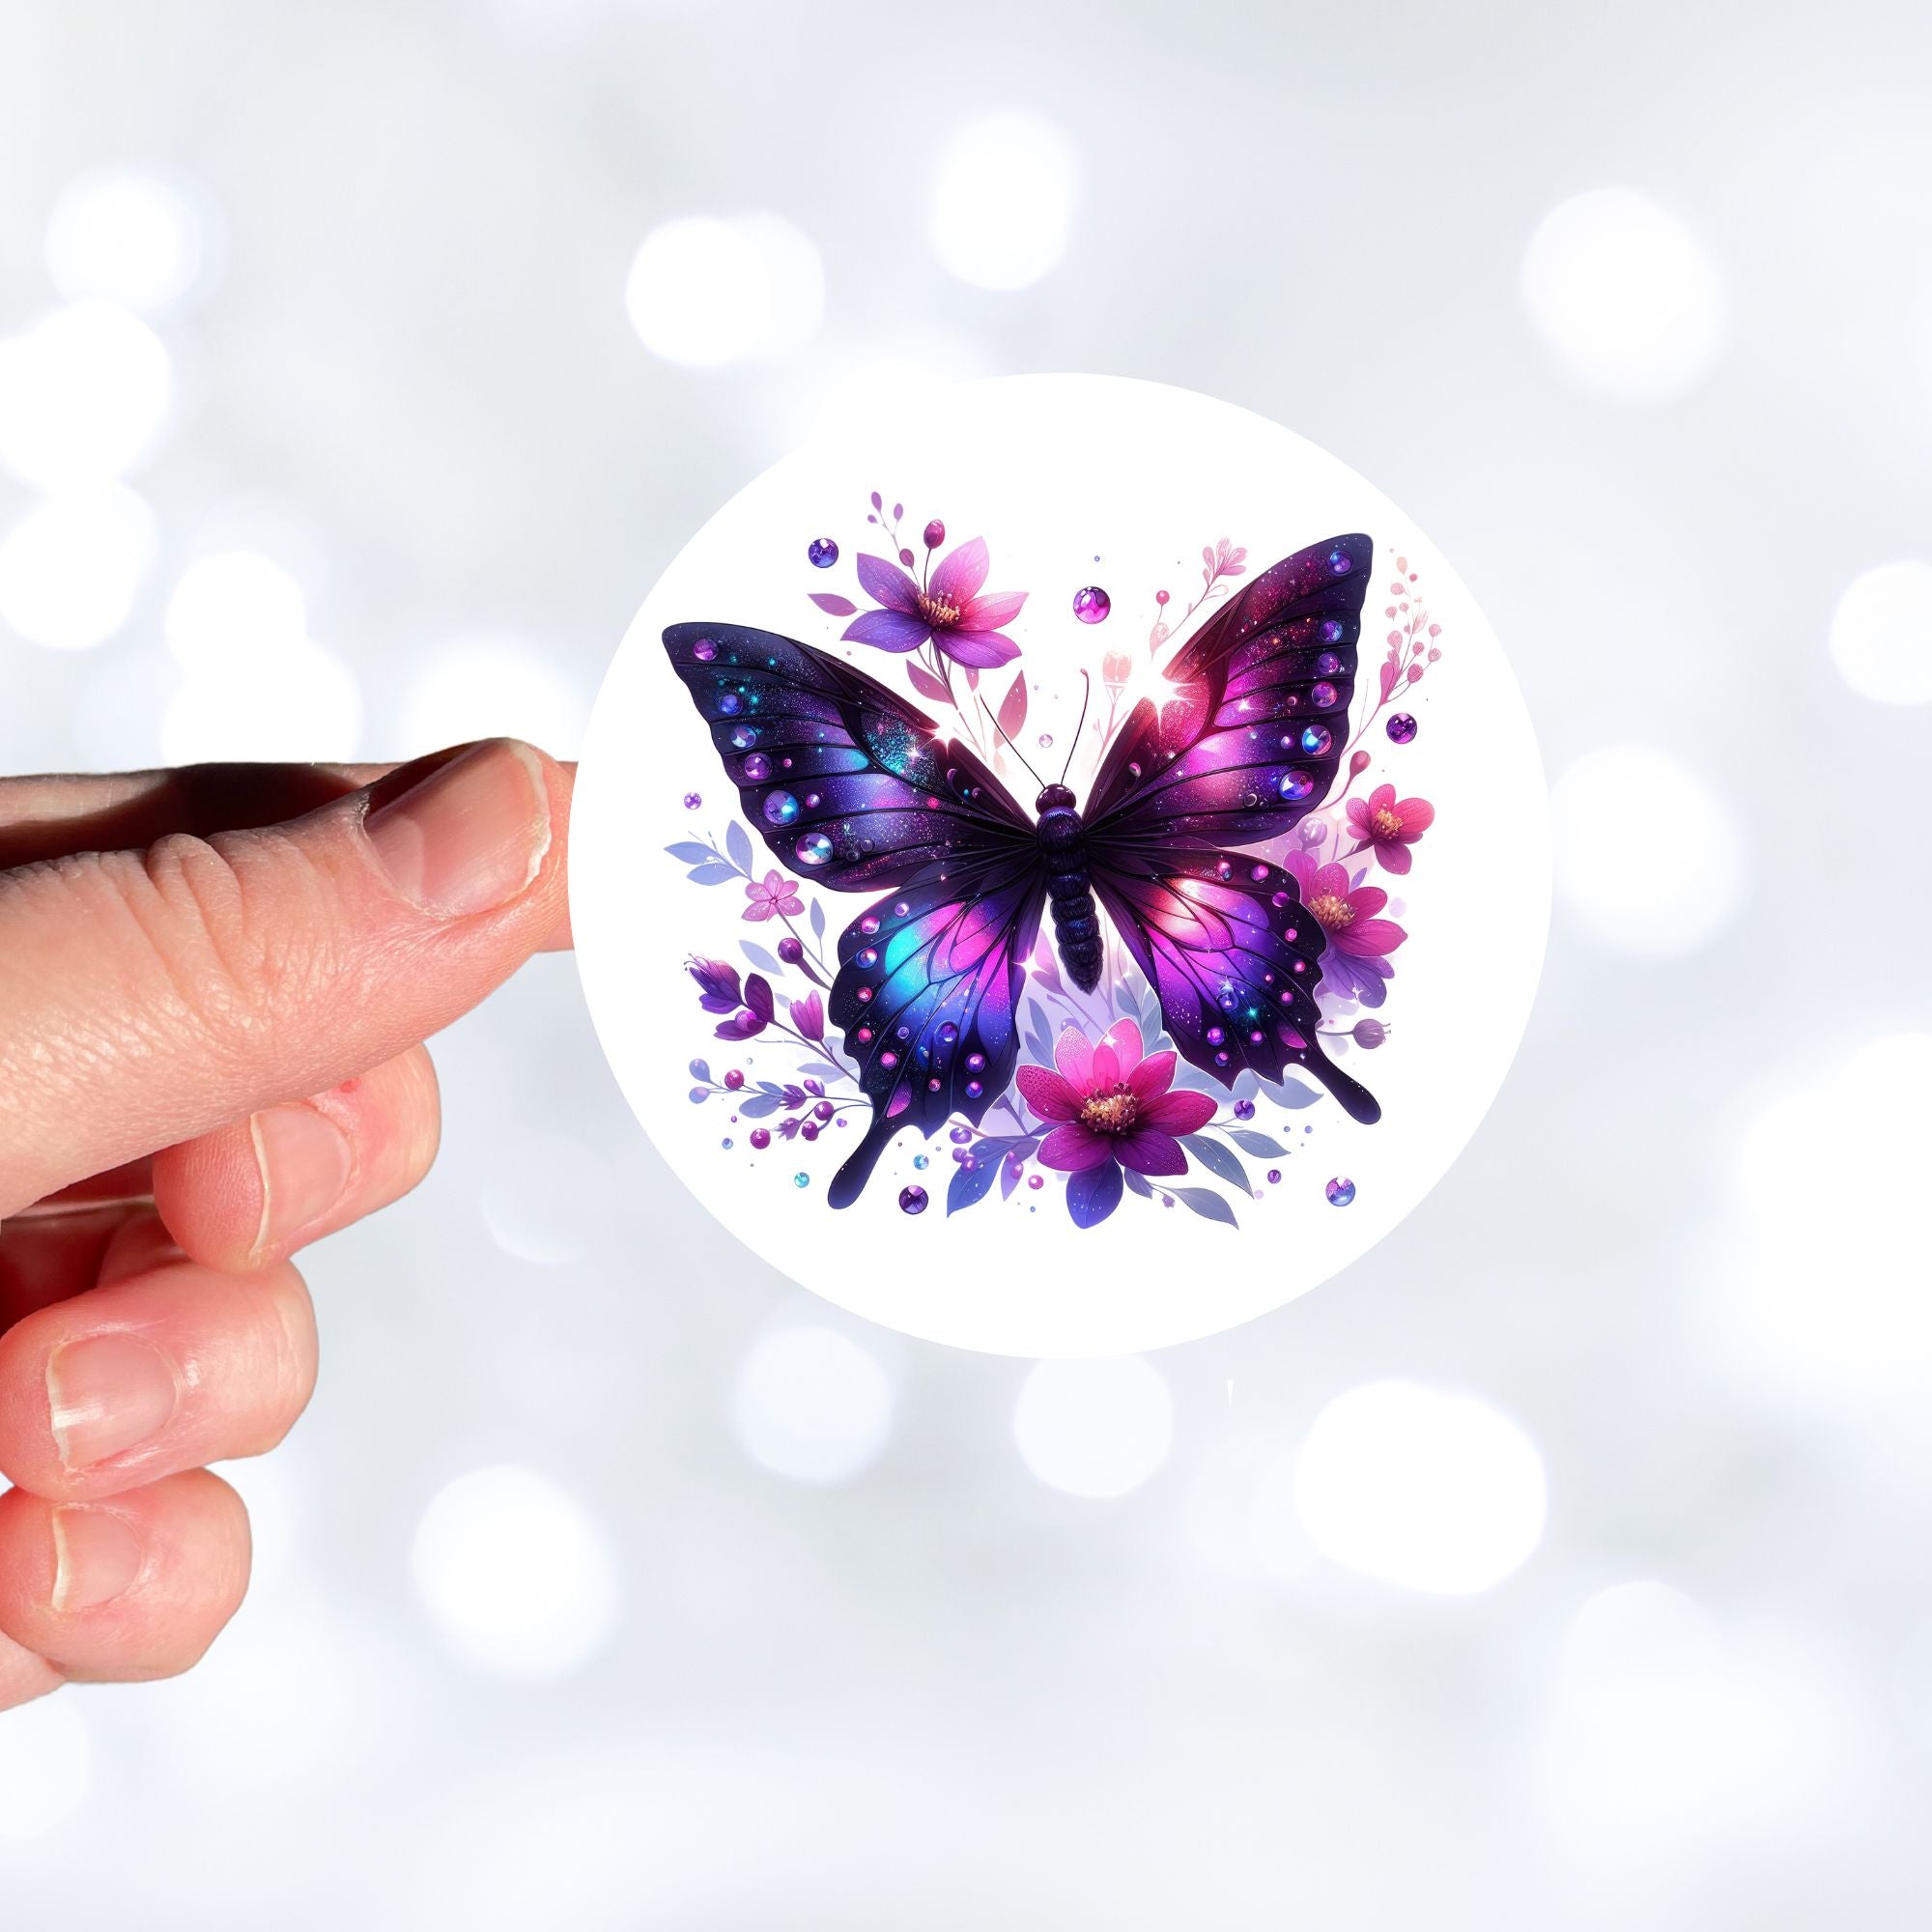 This image shows a hand holding the Purple Butterfly with Stars die cut sticker.